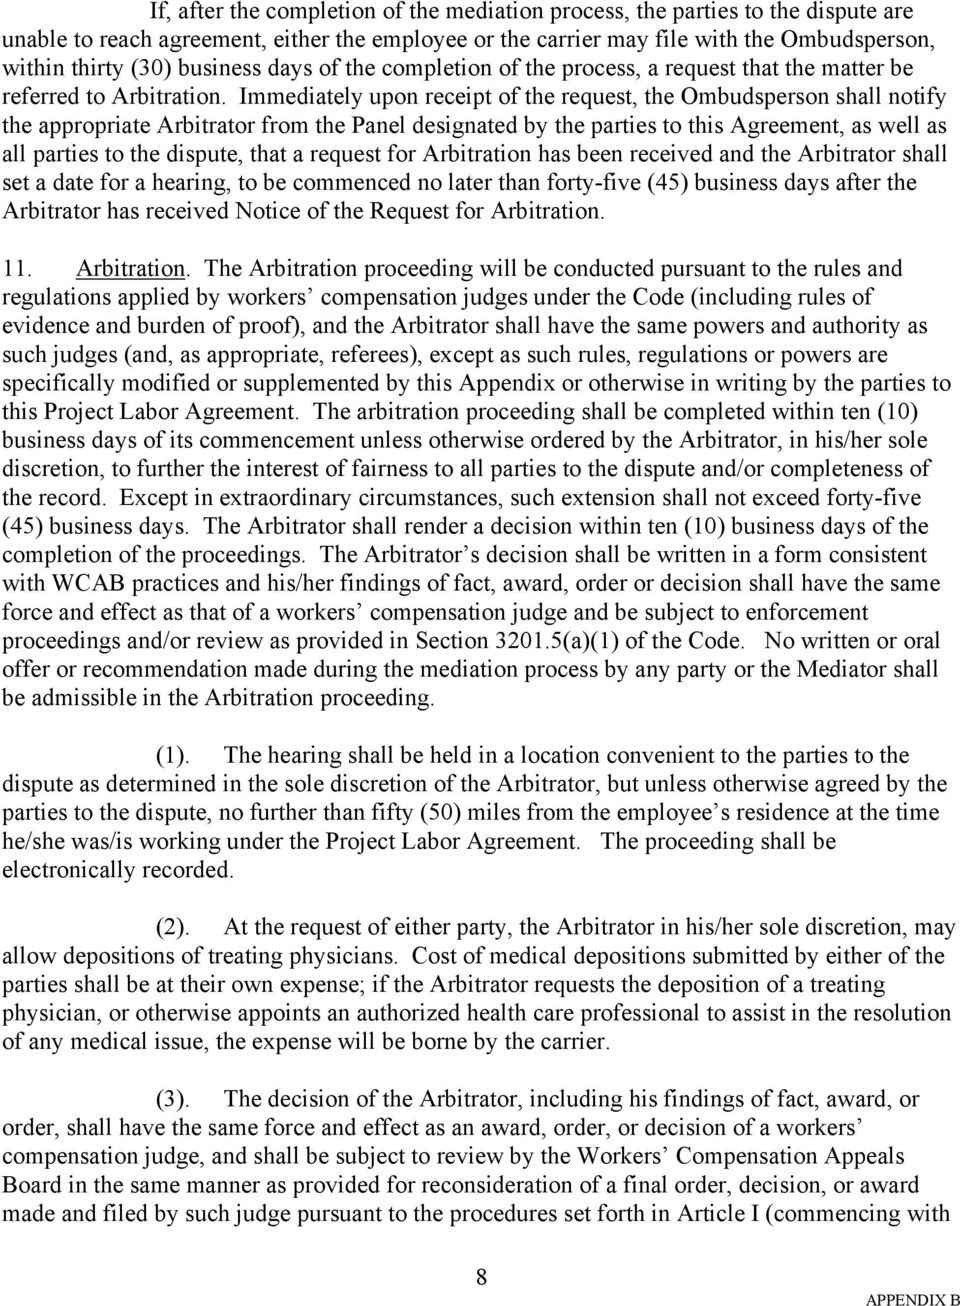 Immediately upon receipt of the request, the Ombudsperson shall notify the appropriate Arbitrator from the Panel designated by the parties to this Agreement, as well as all parties to the dispute,